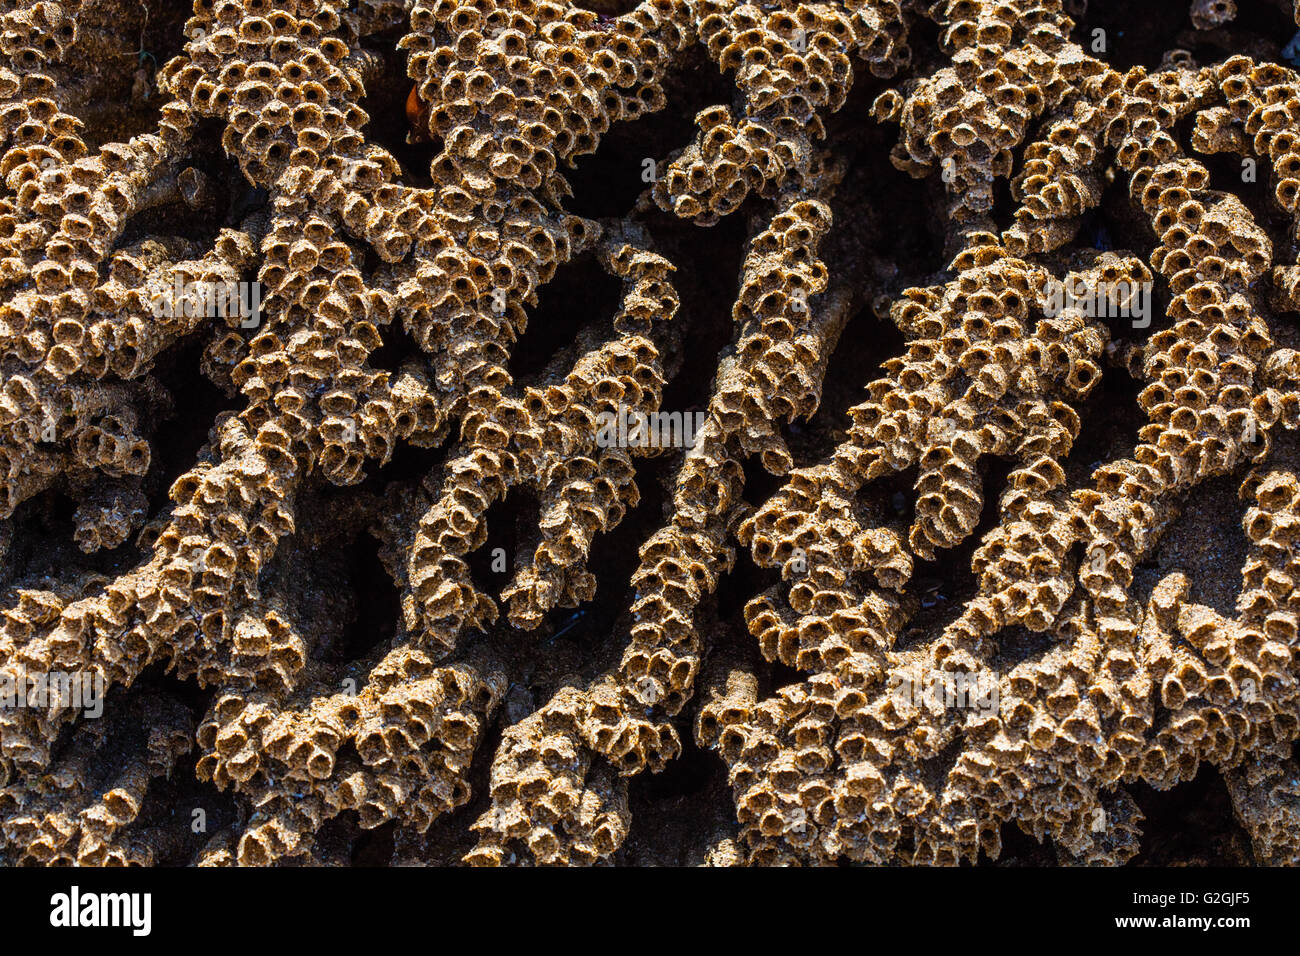 Sandy tubes of the Honeycomb Worm Sabellaria alveolata on rocks of the Gower peninsula in South Wales UK Stock Photo